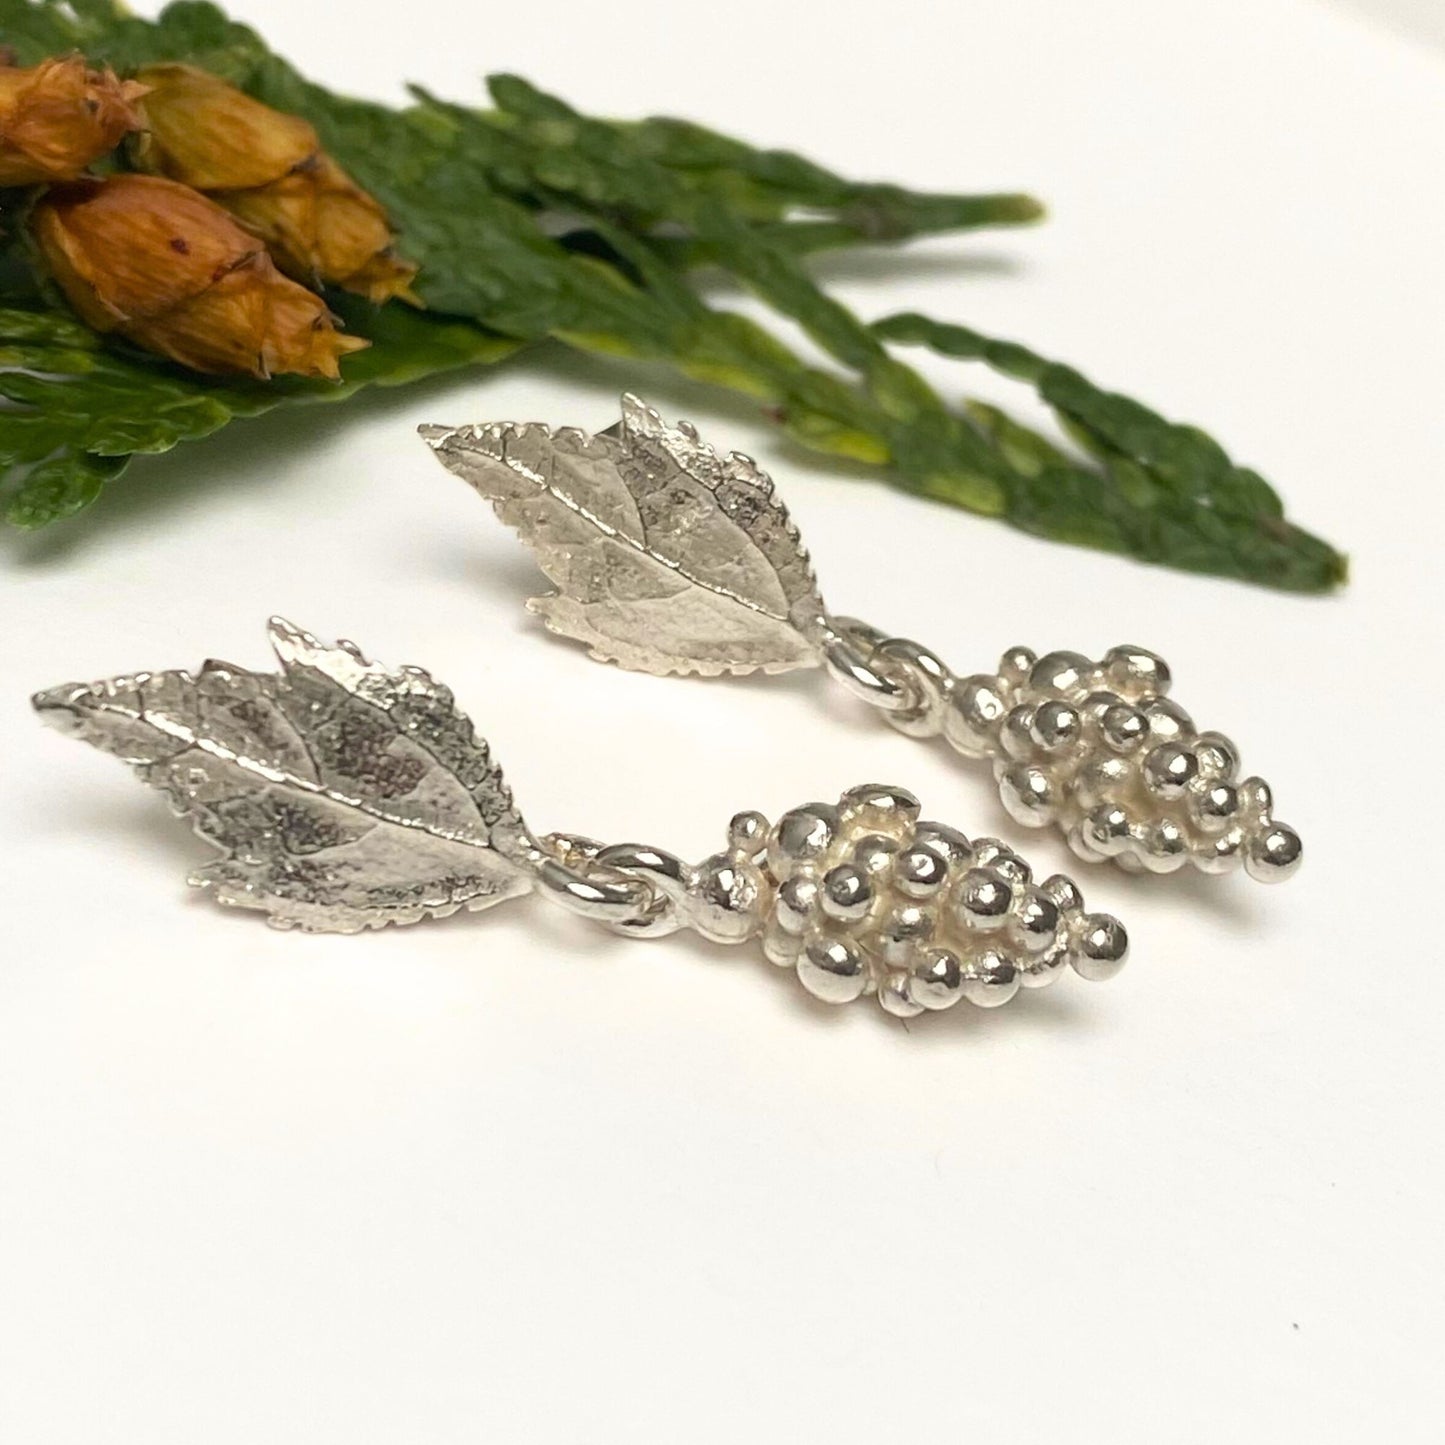 Woodland Elvish Silver Leaf and Berry Earrings